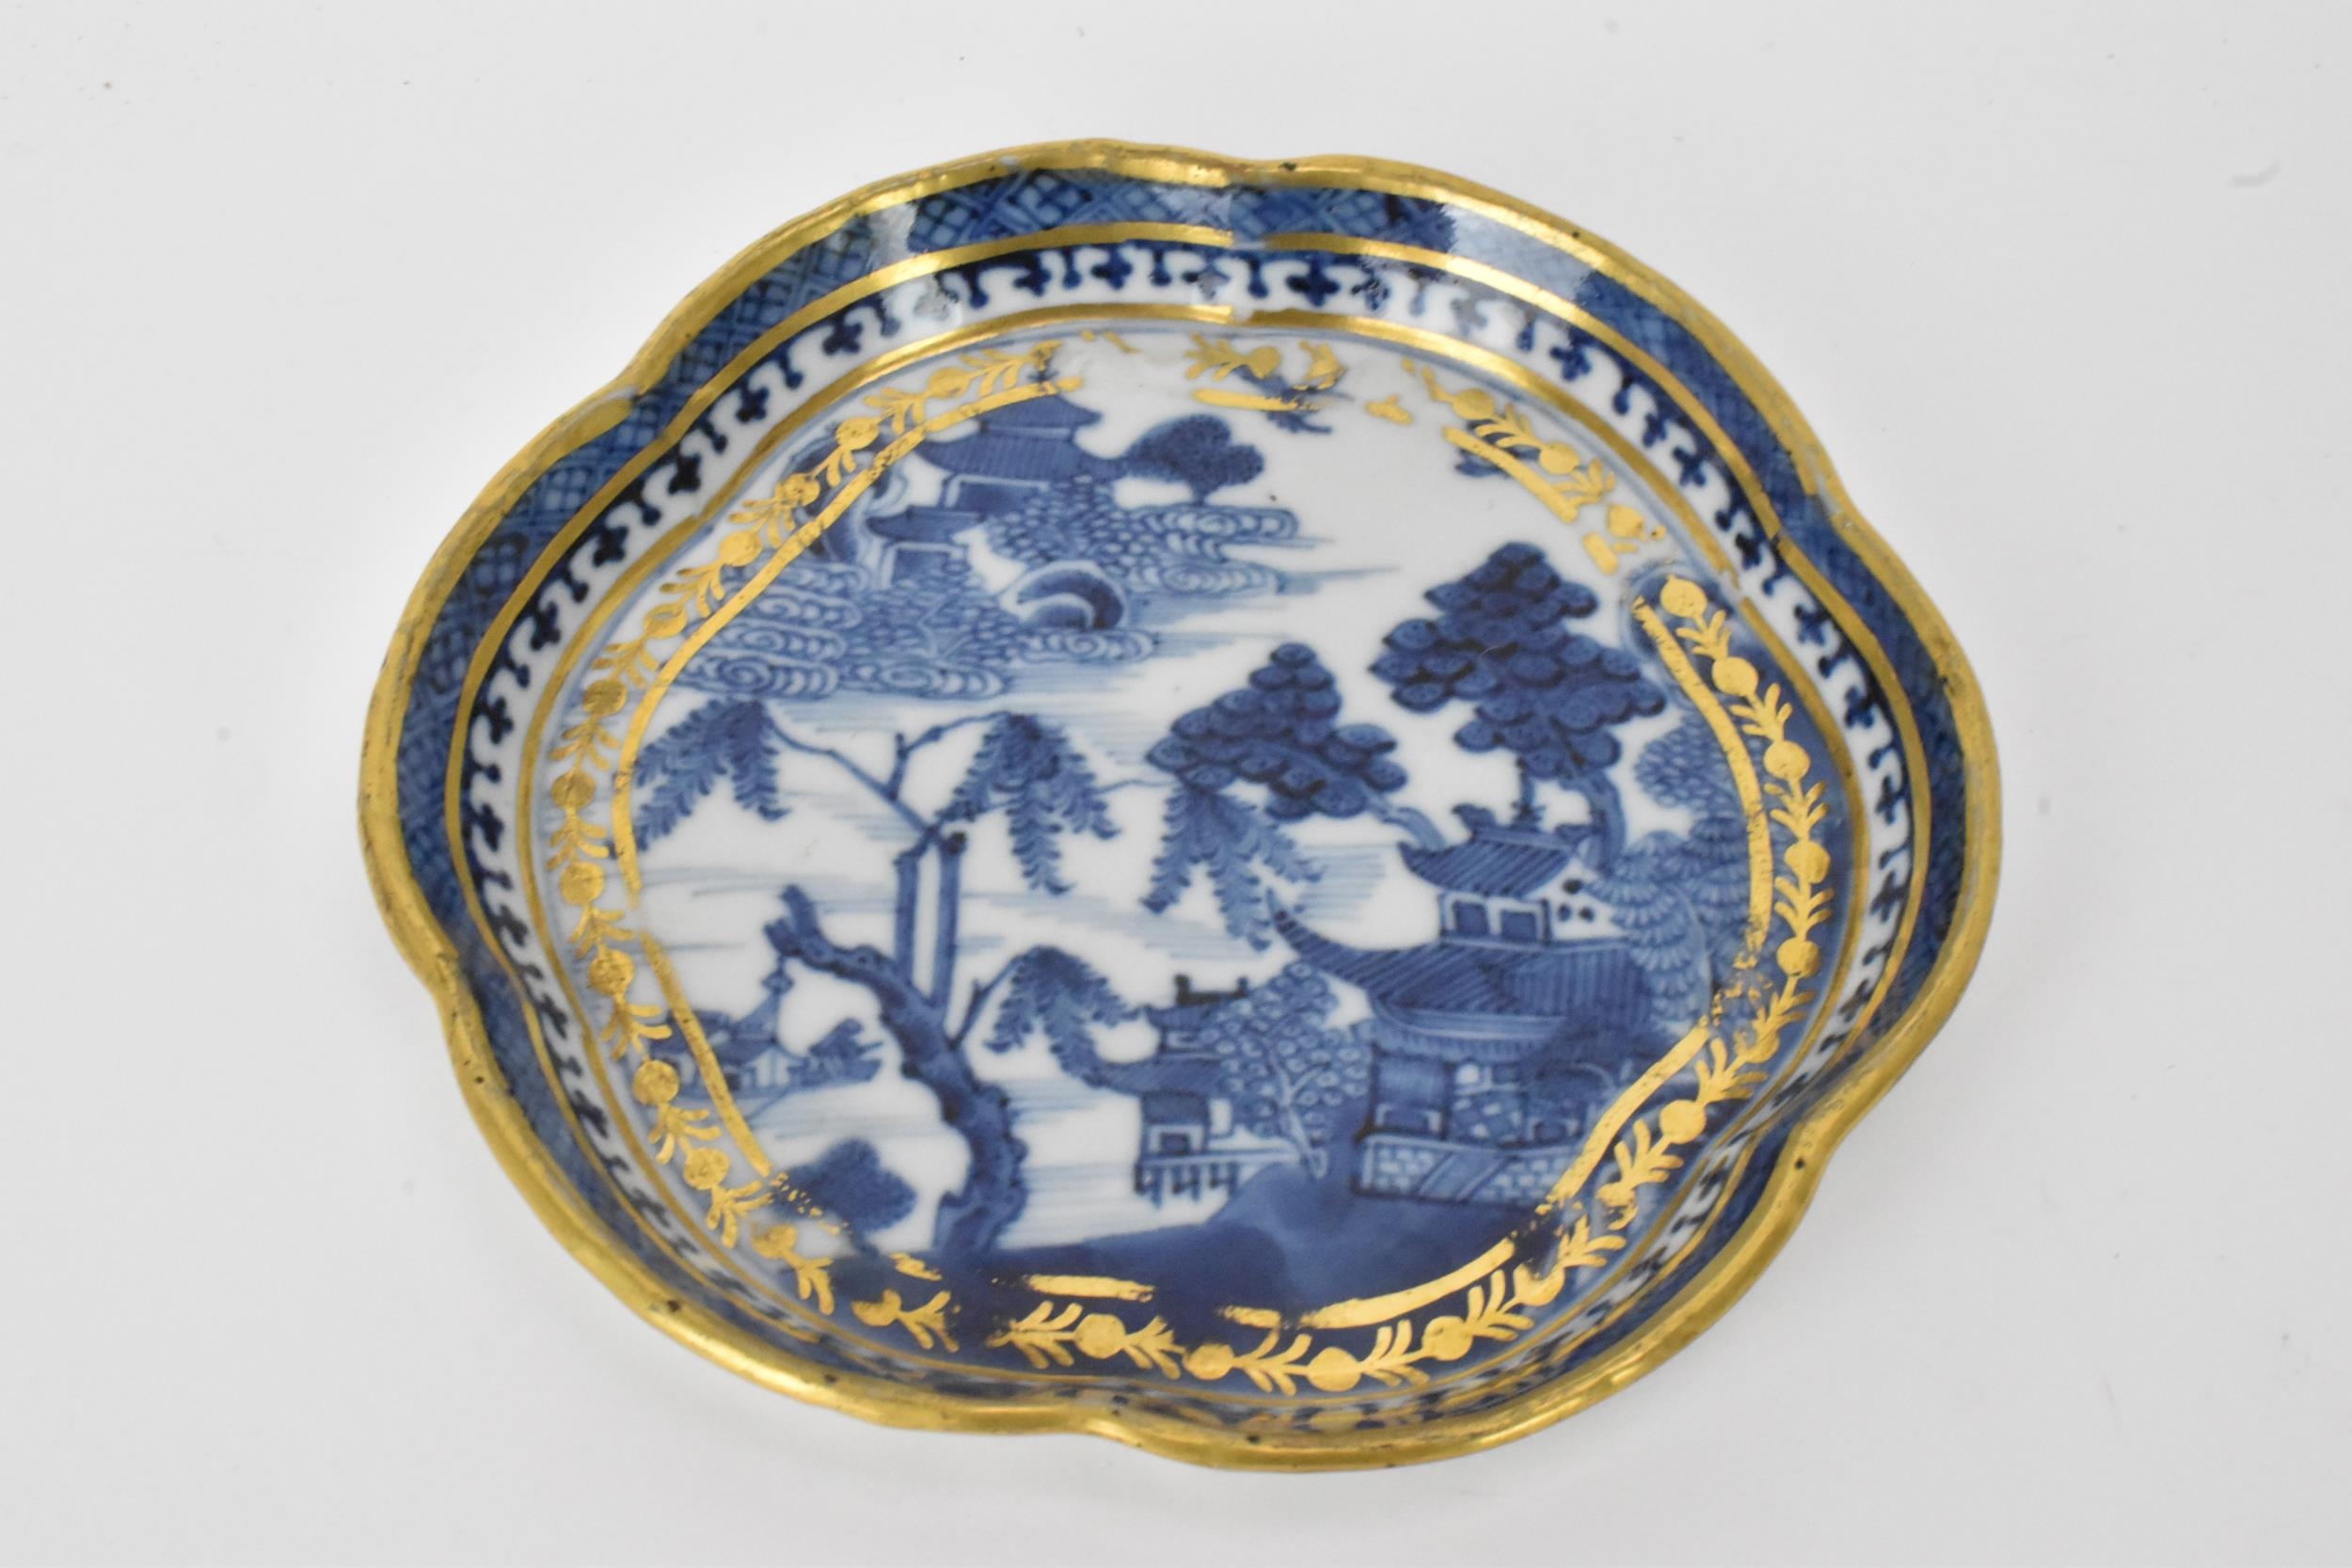 A Chinese export Qing dynasty blue and white teapot and stand, late 18th century, decorated with - Image 10 of 11